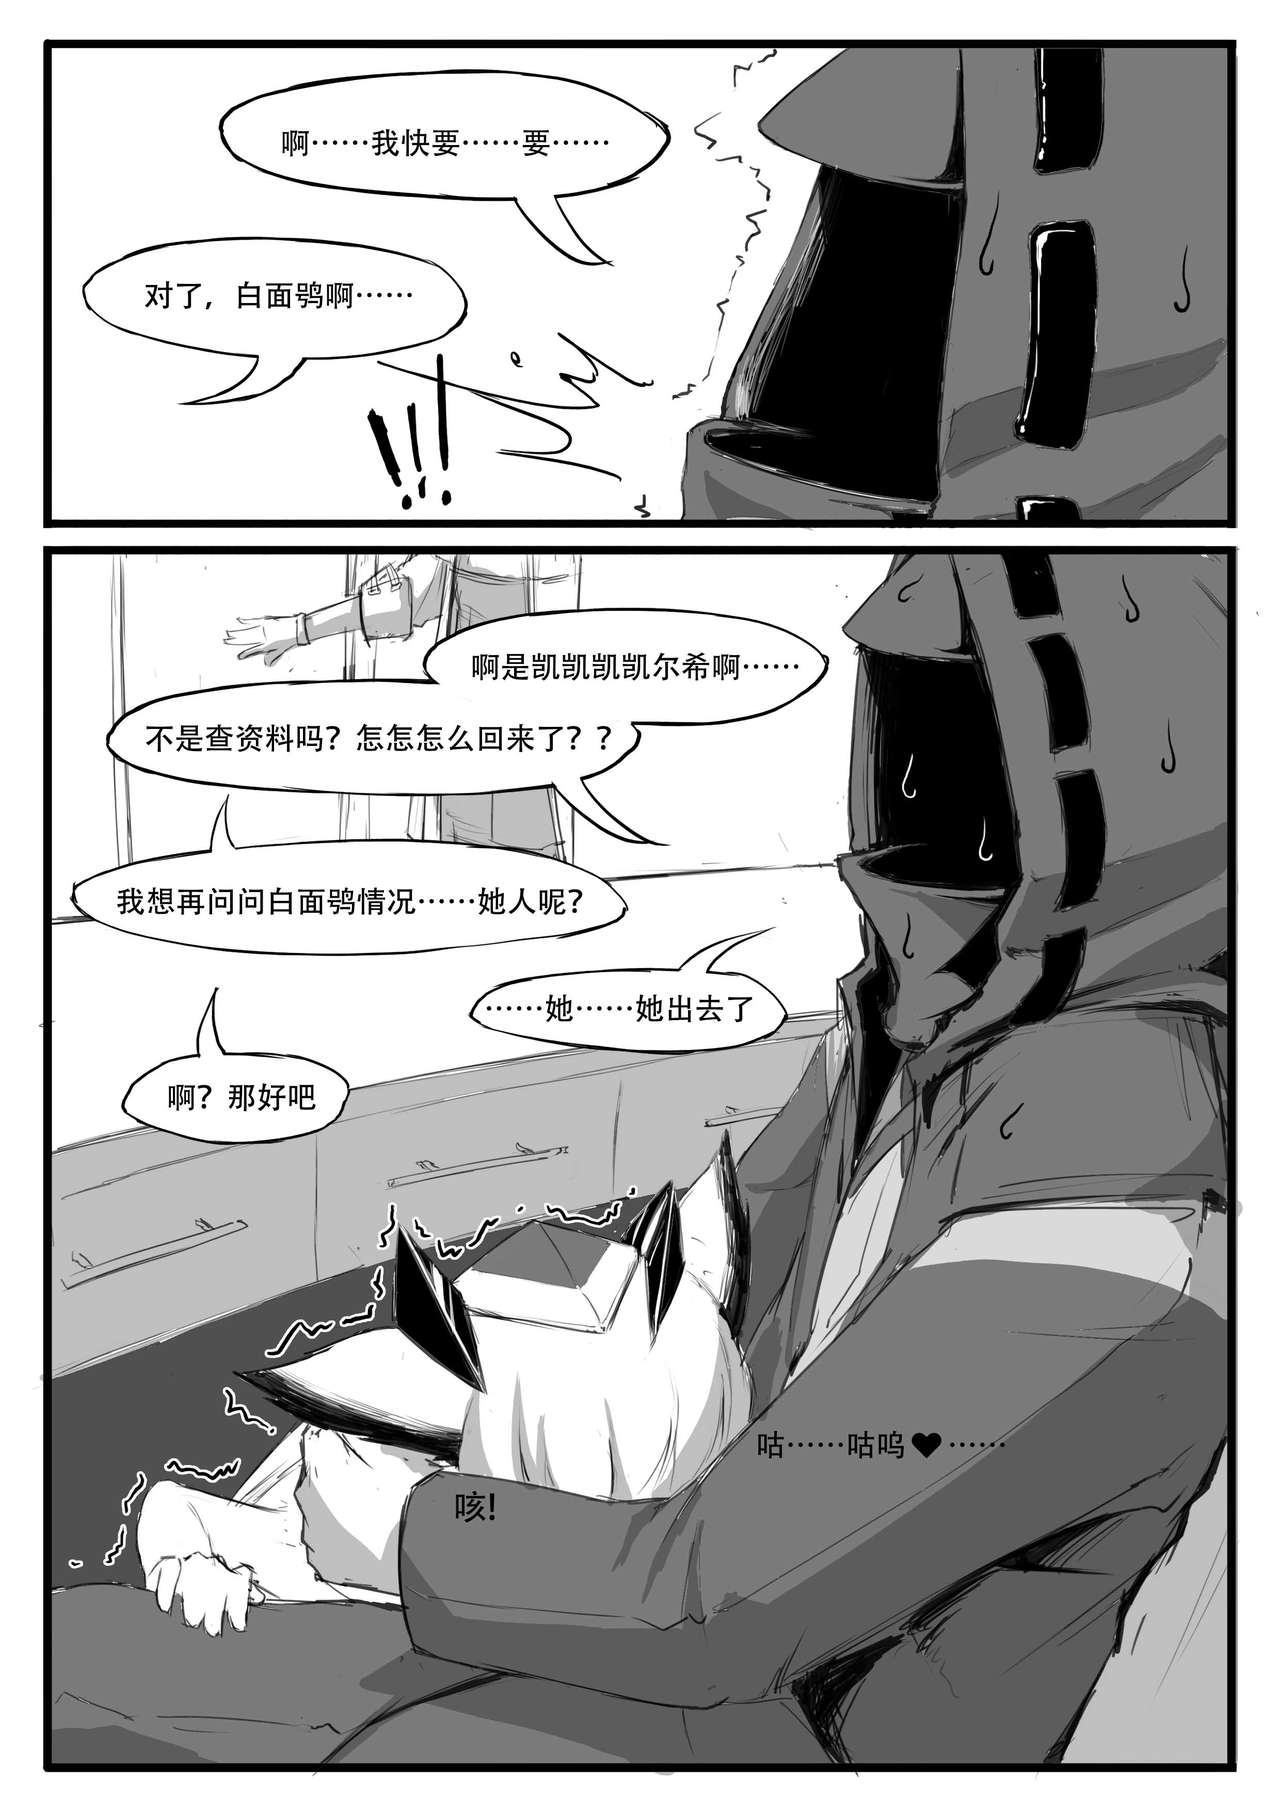 [saluky] 关于白面鸮变成了幼女这件事 (Arknights) [Chinese] page 14 full